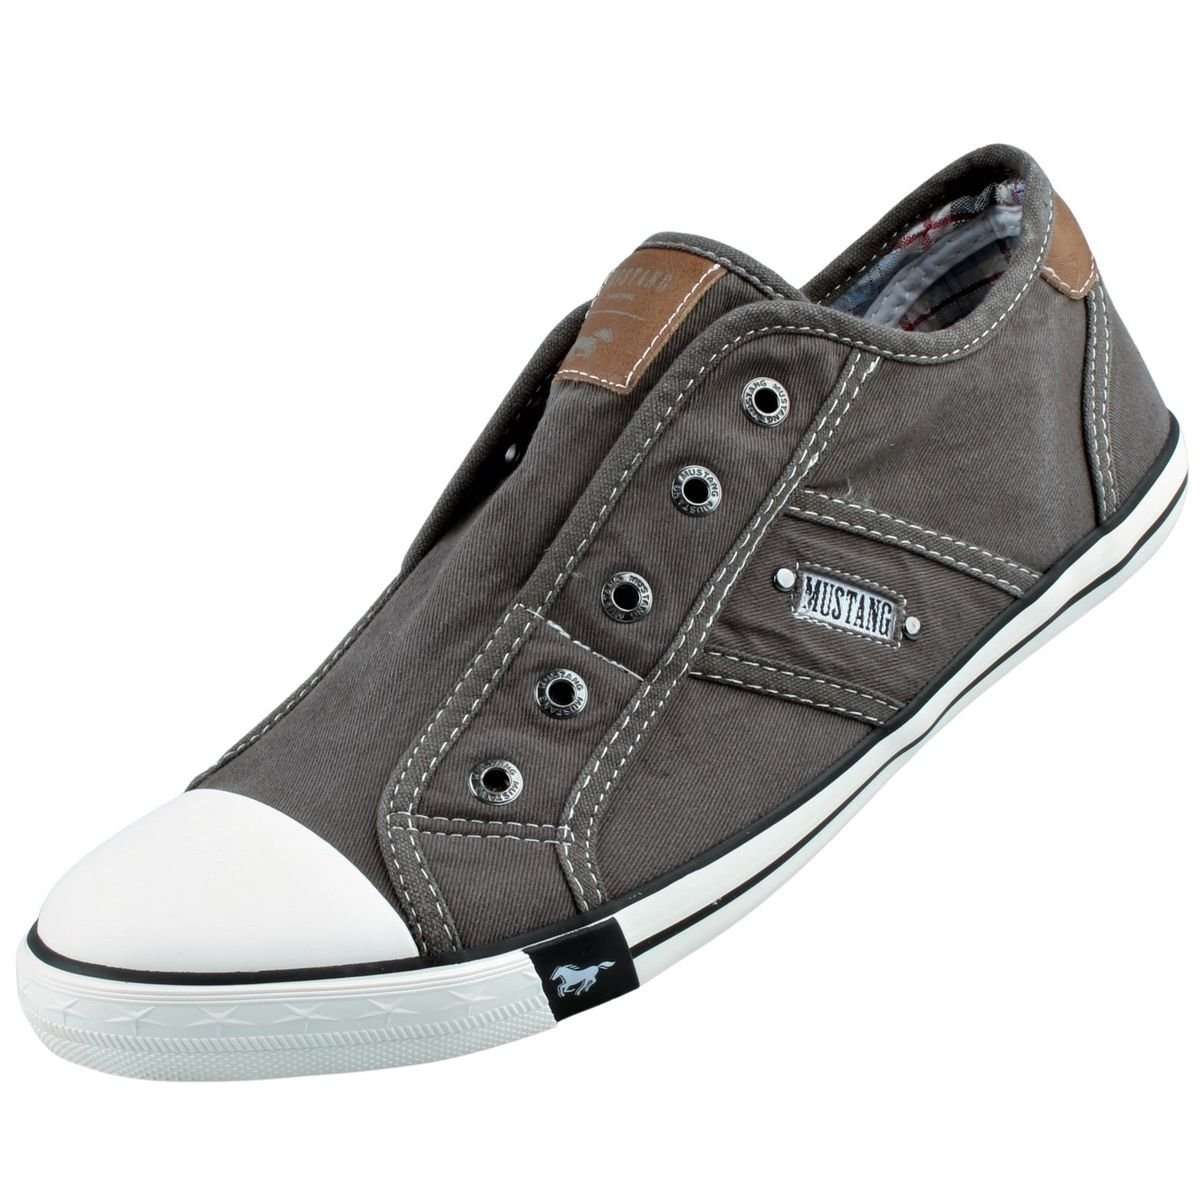 Mustang Shoes 1099409/2 Sneaker von Mustang Shoes